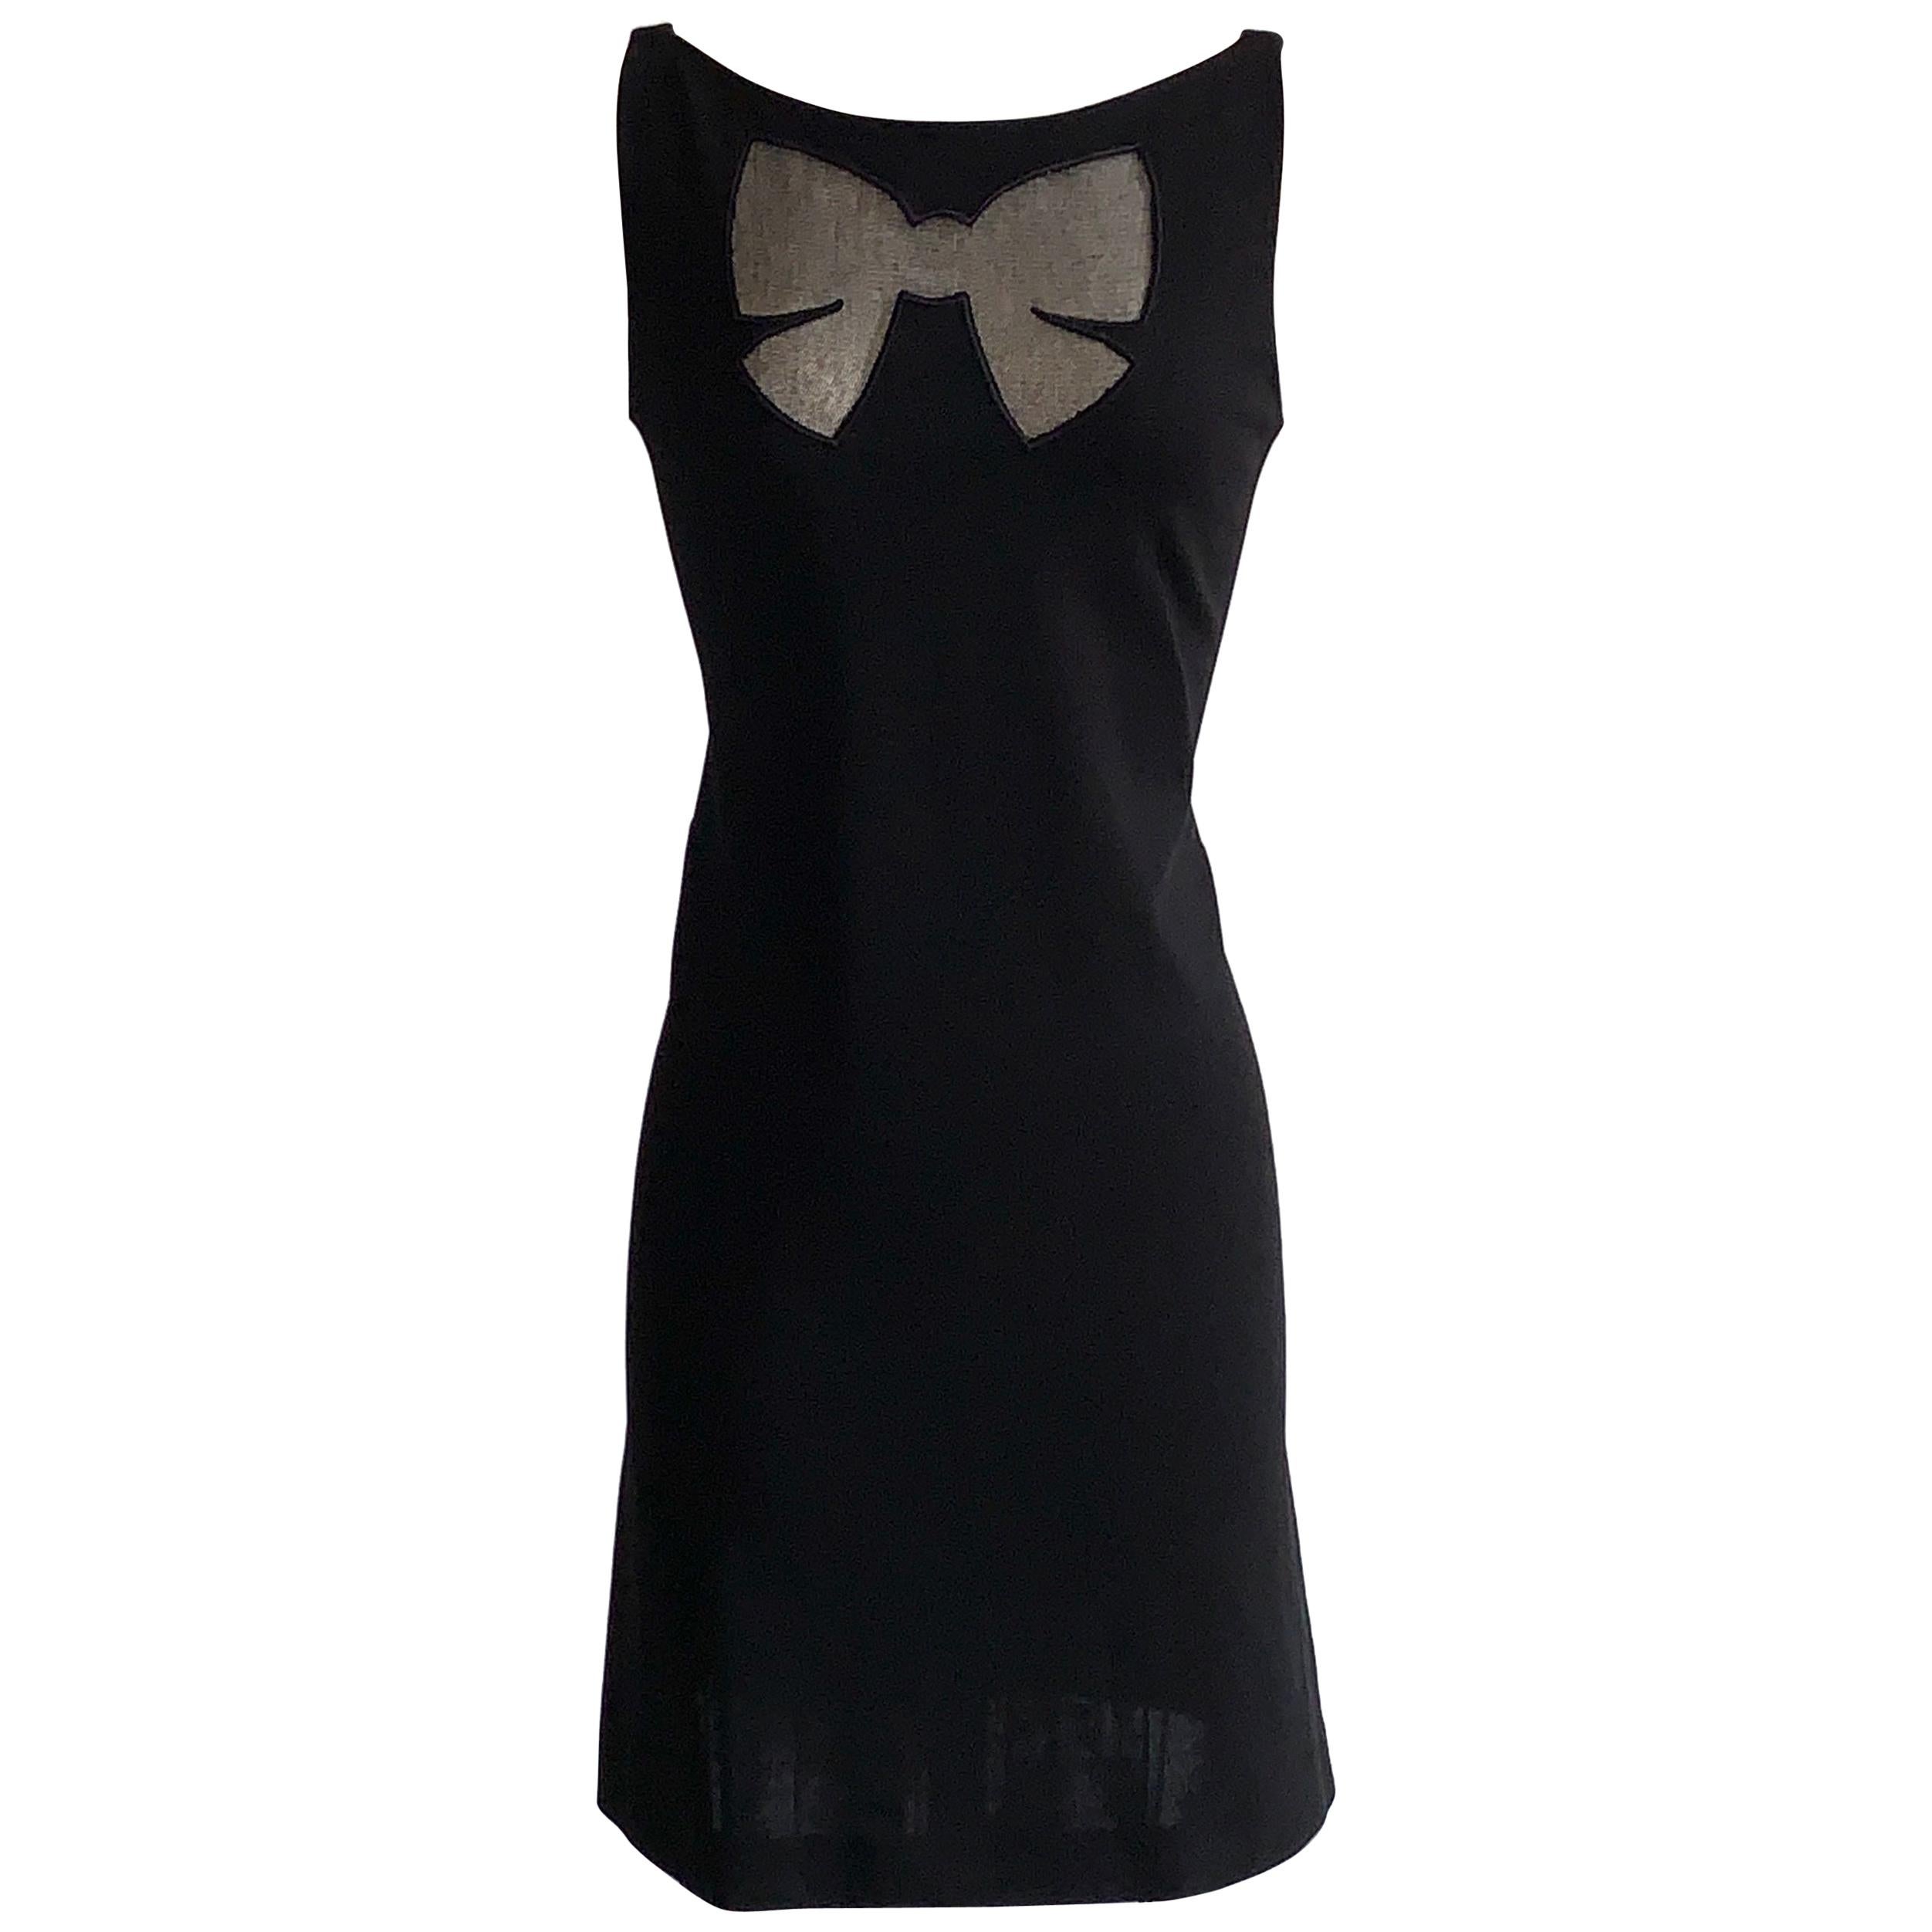 Moschino Cheap and Chic Black Mesh Bow Knit Dress For Sale